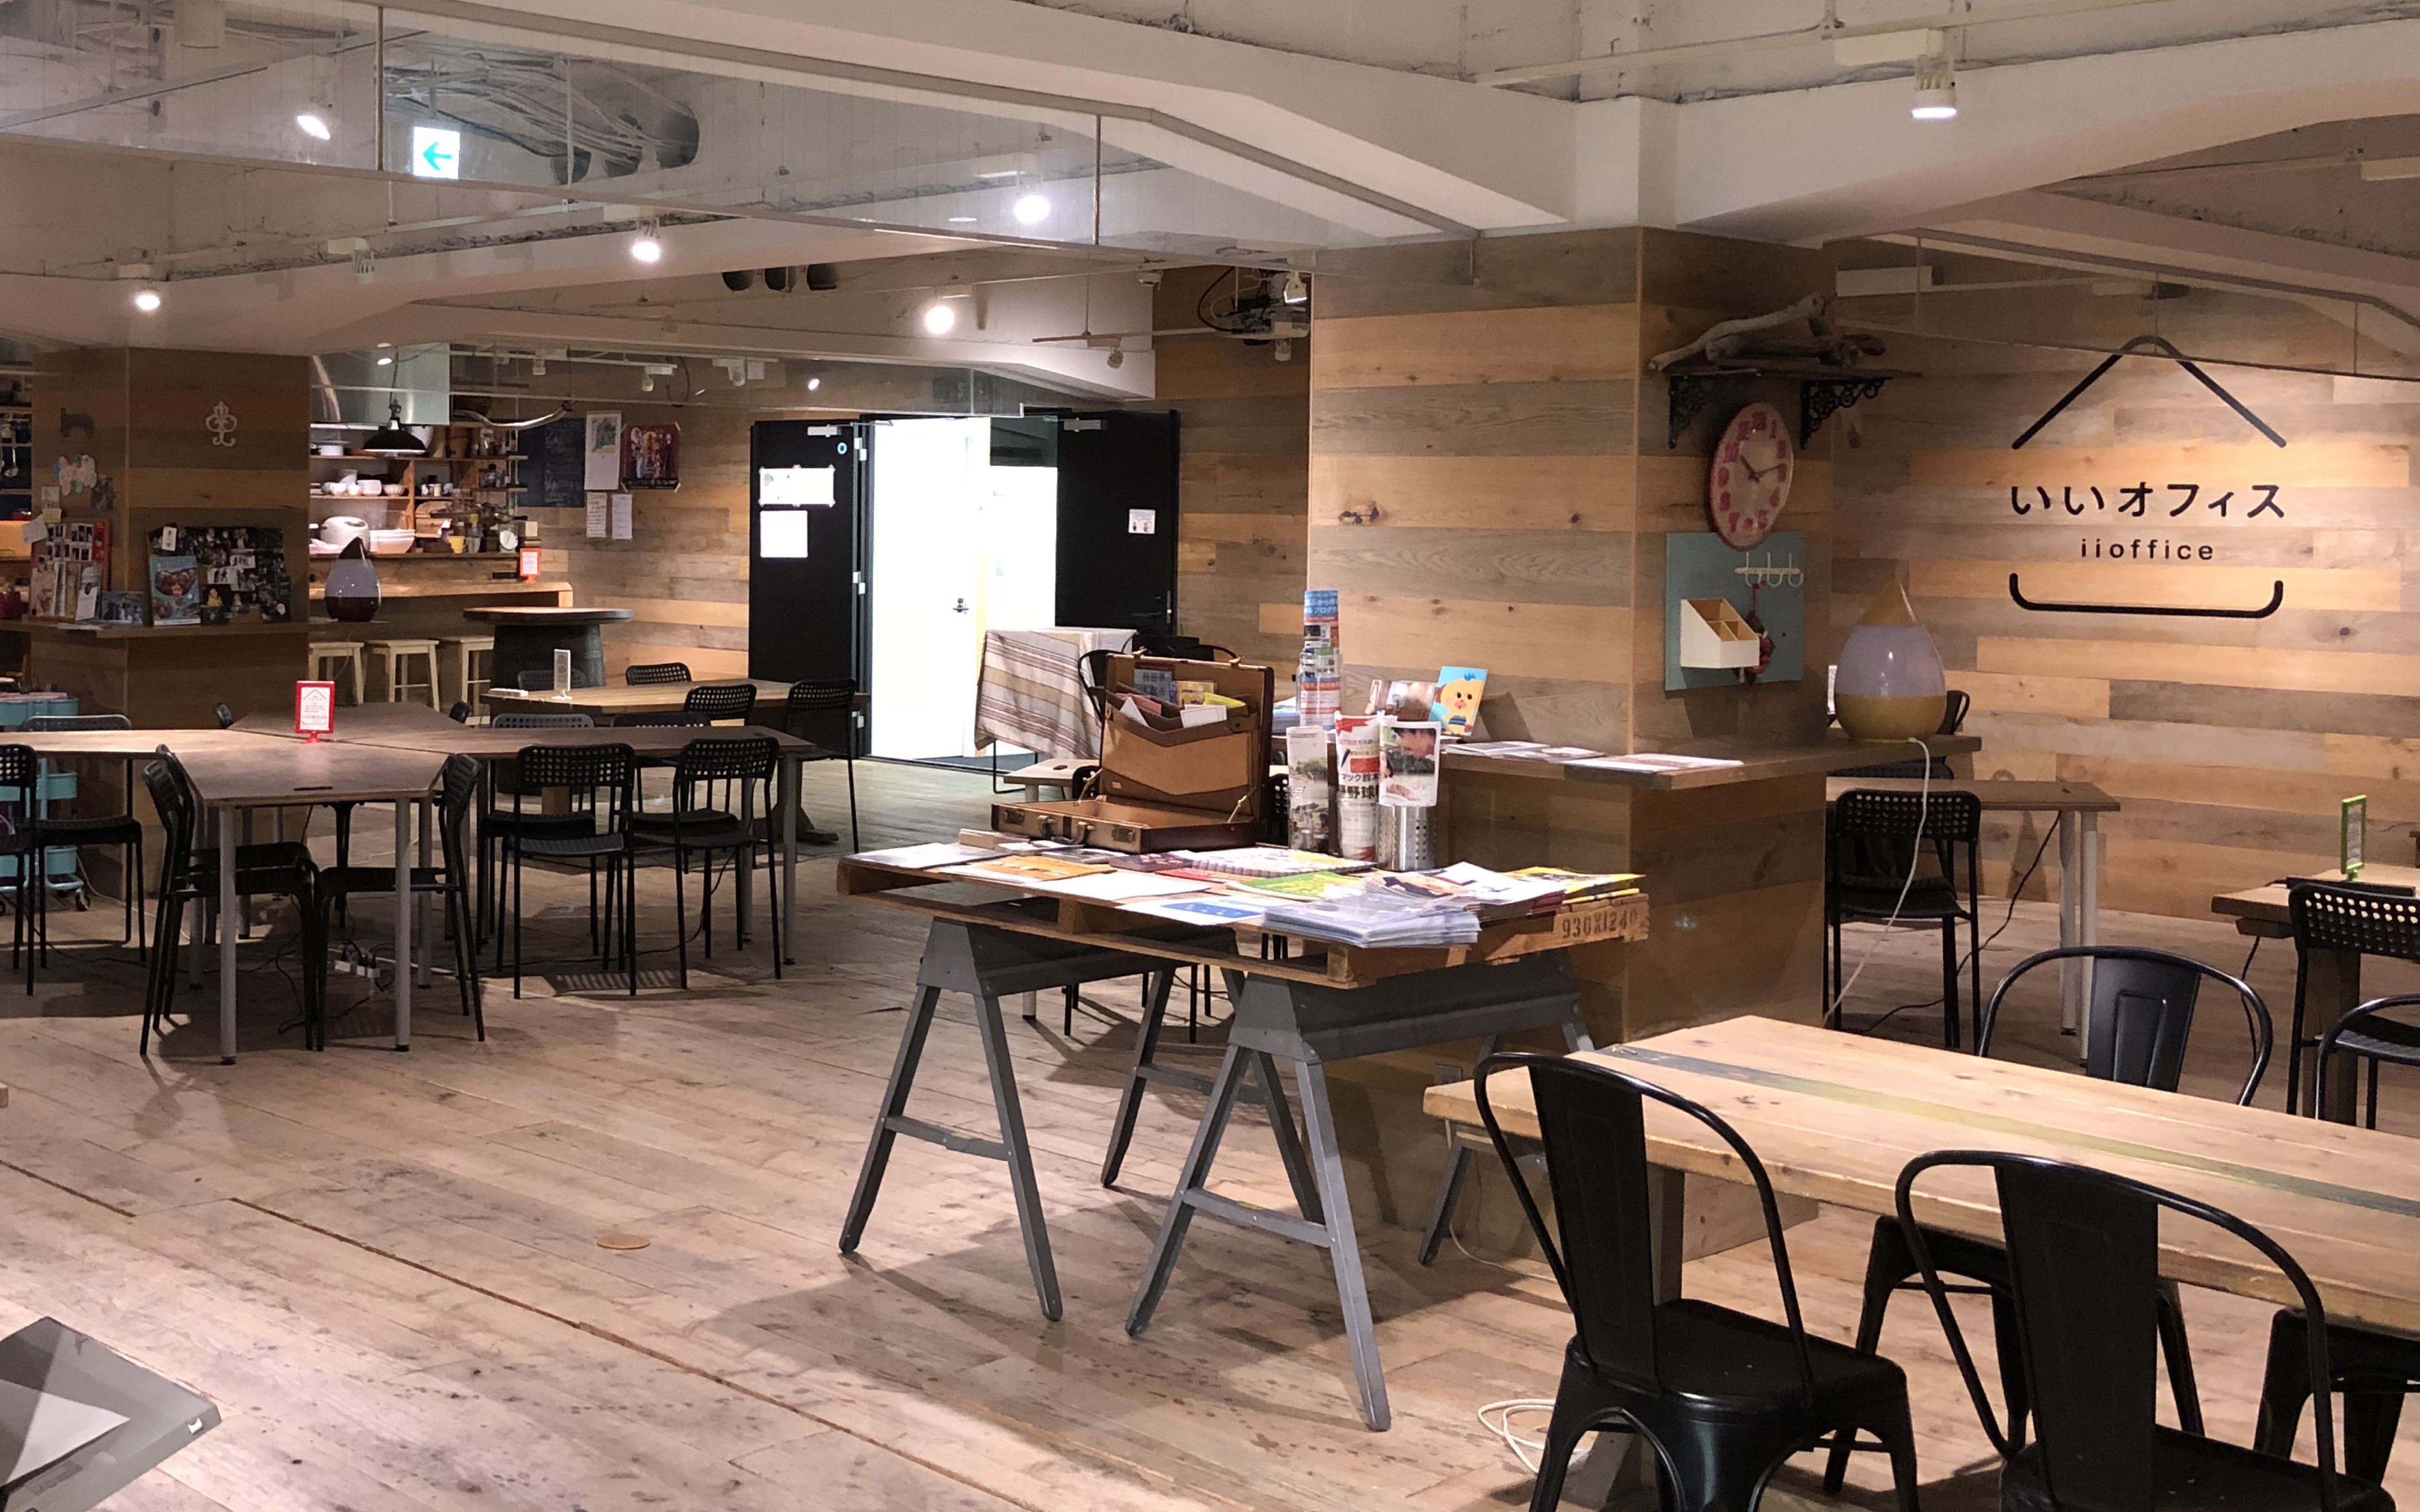 iioffice Ueno: Tokyo Coworking Space with Young Energy